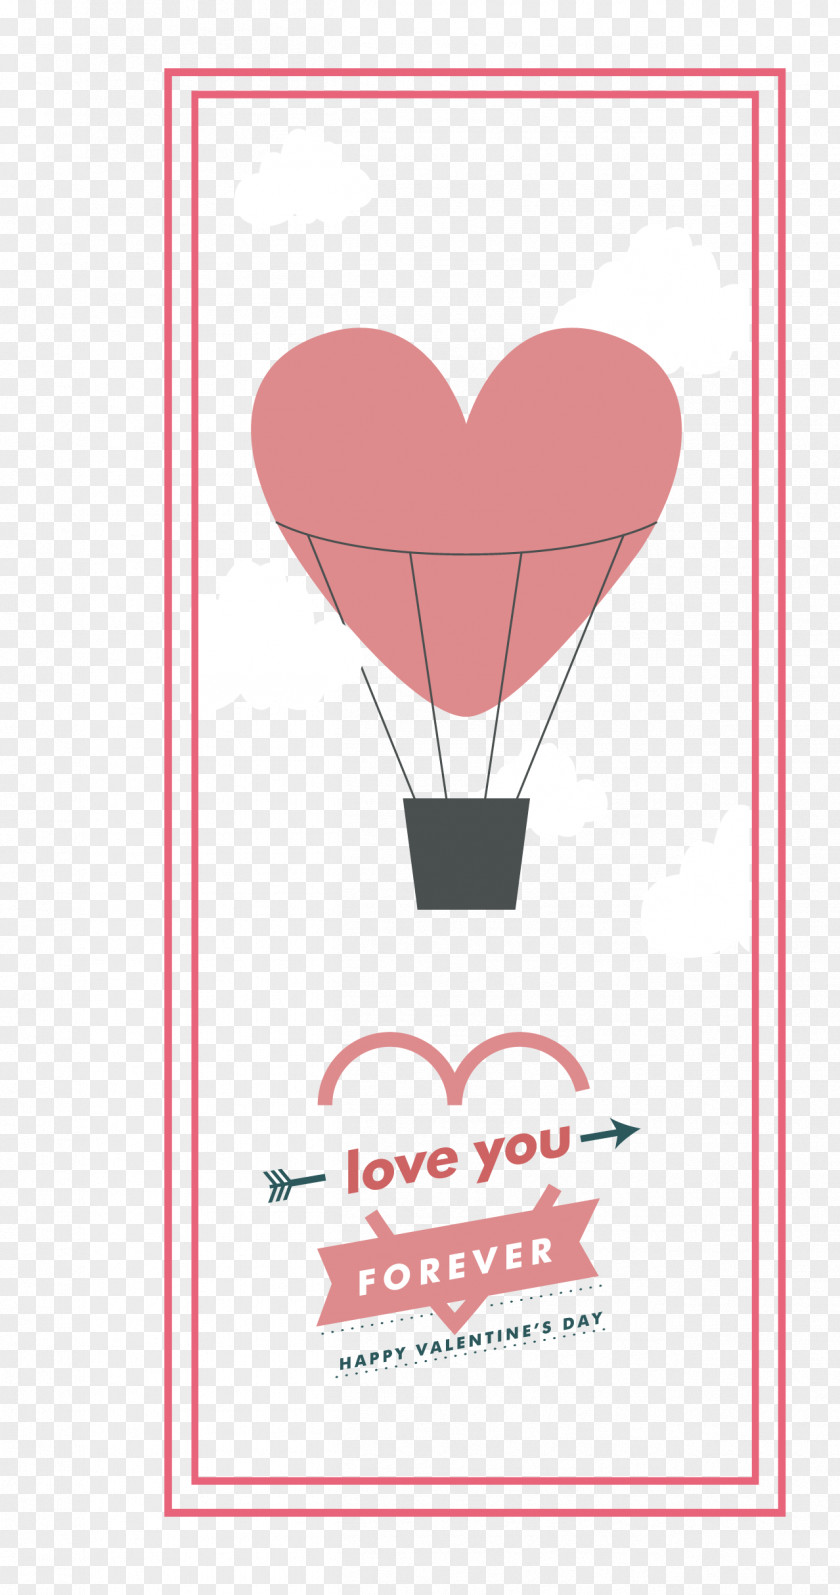 Hot Air Balloon Valentine Card Template PNG